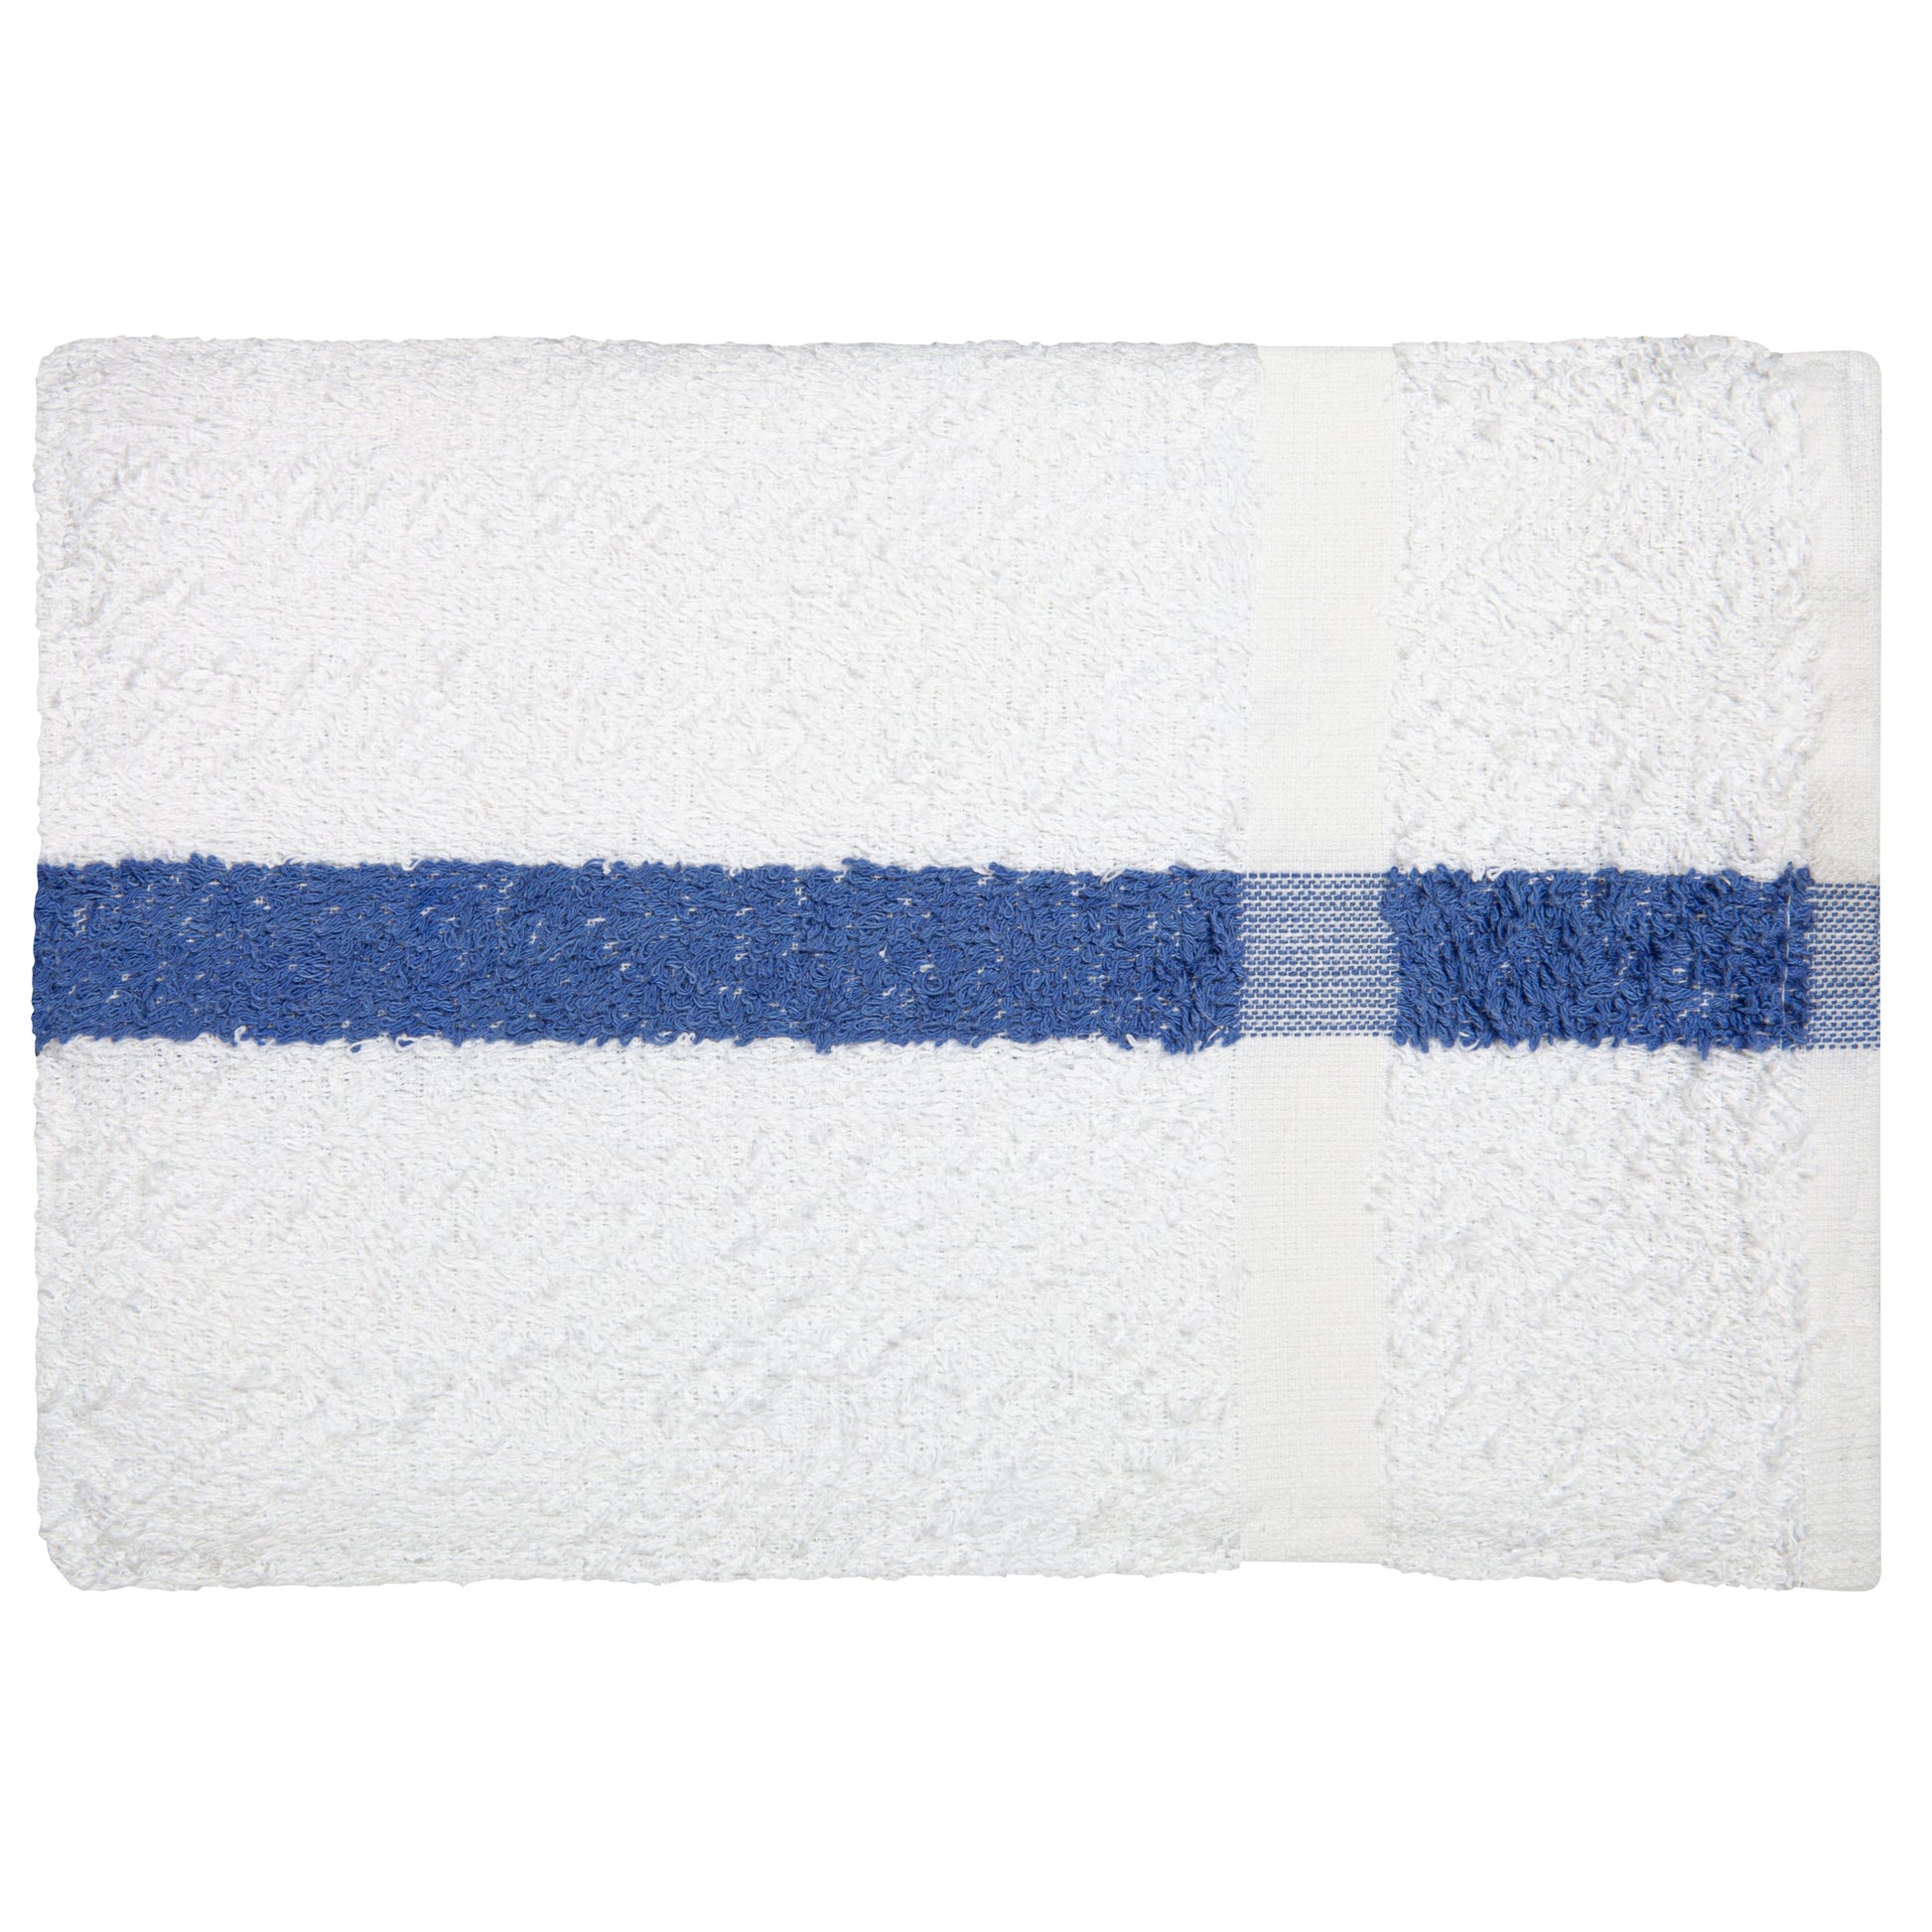 American Dawn | 22X44 Inch White With Blue Center Stripe And No Cam Healthcare Towel | Terry Towel